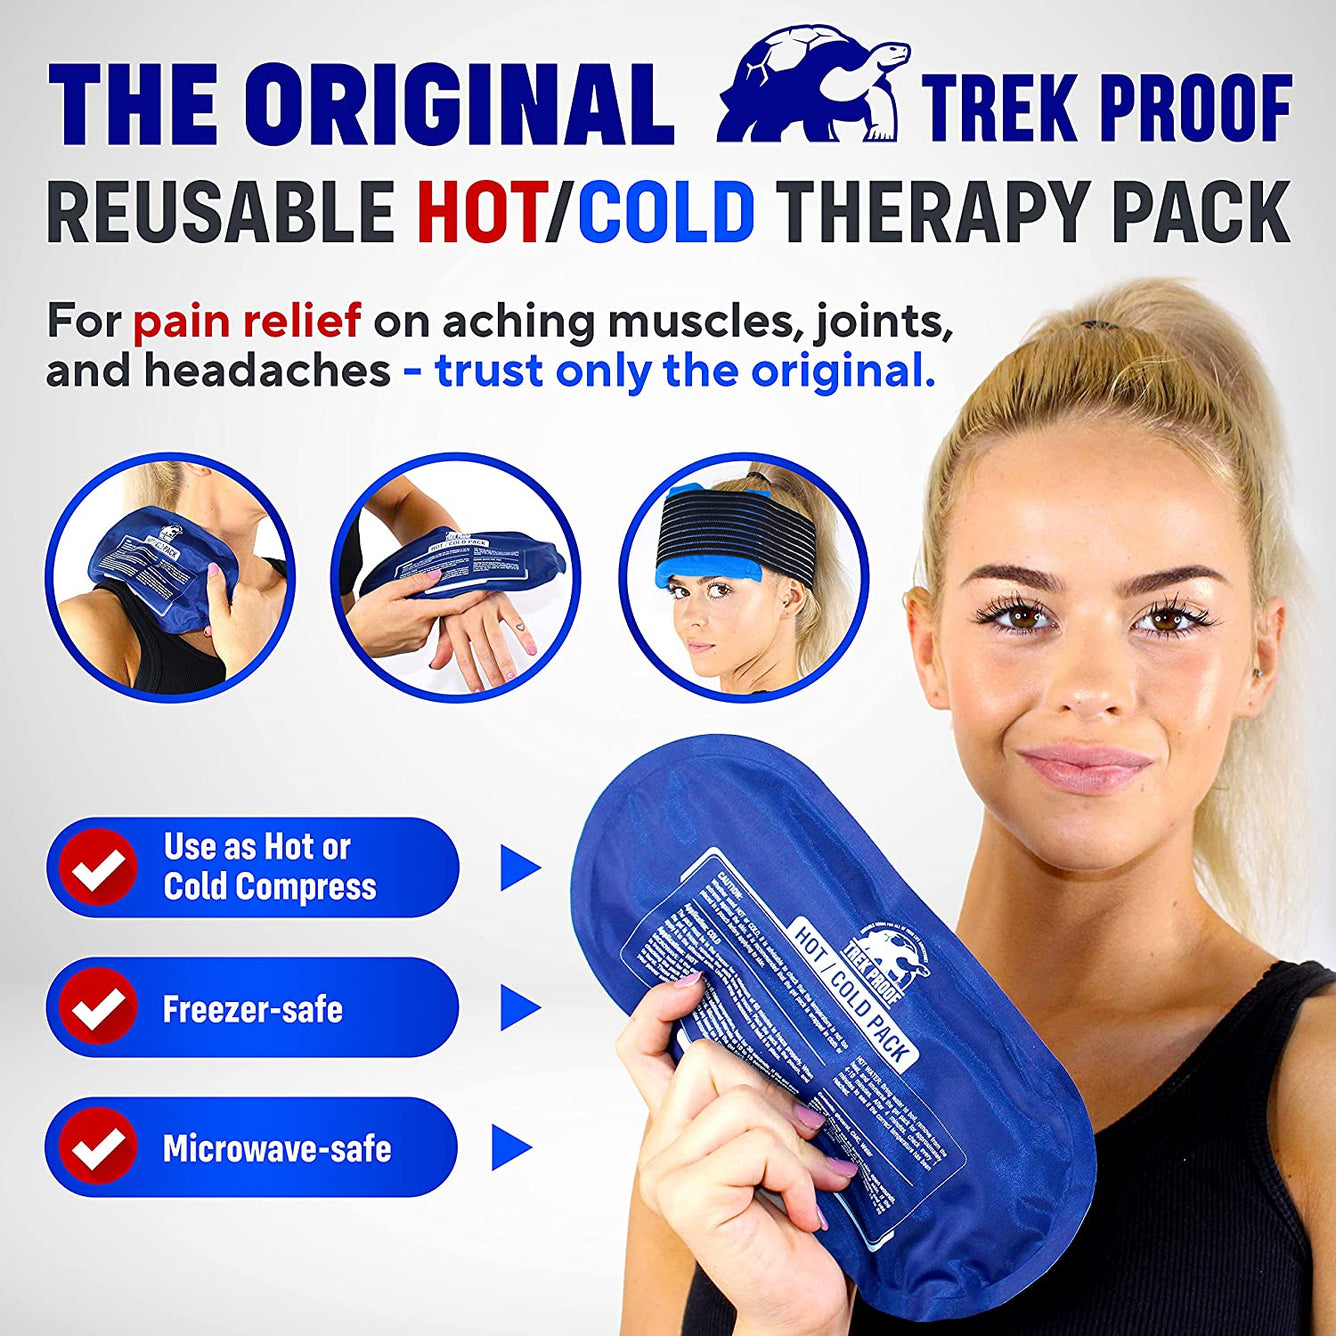 Trek Proof  -  Reusable Hot and Cold Therapy Ice Pack,  3-Piece Set,  Non Toxic Gel Wrap Support Injury Recovery, Alleviate Joint and Muscle Pain – Rotator Cuff, Knees, Back, headache relief and more